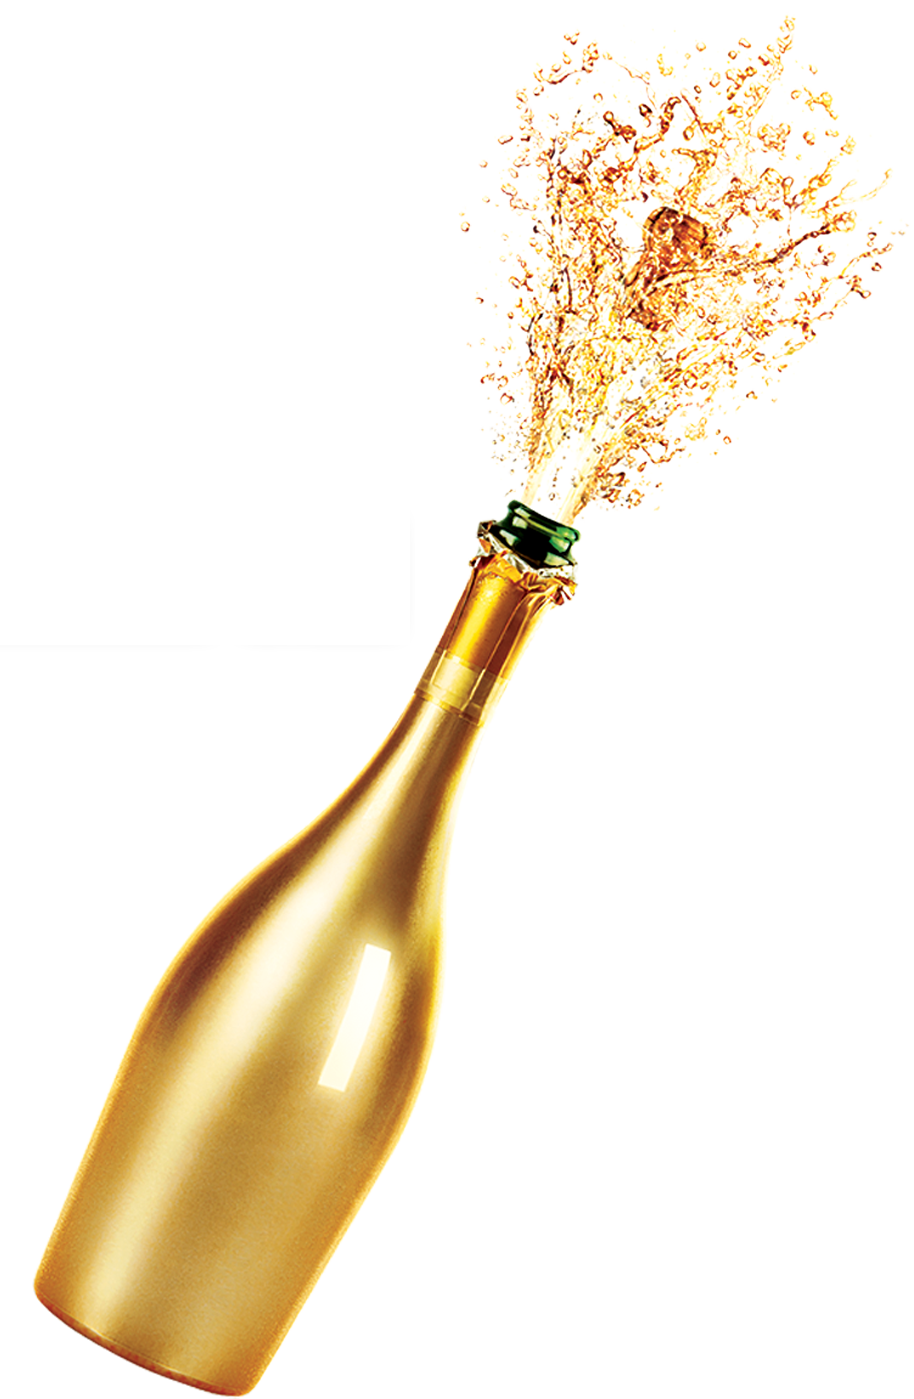 692-6924984_transparent-champagne-pop-png-gold-champagne-bottle-png.png  by marsham1